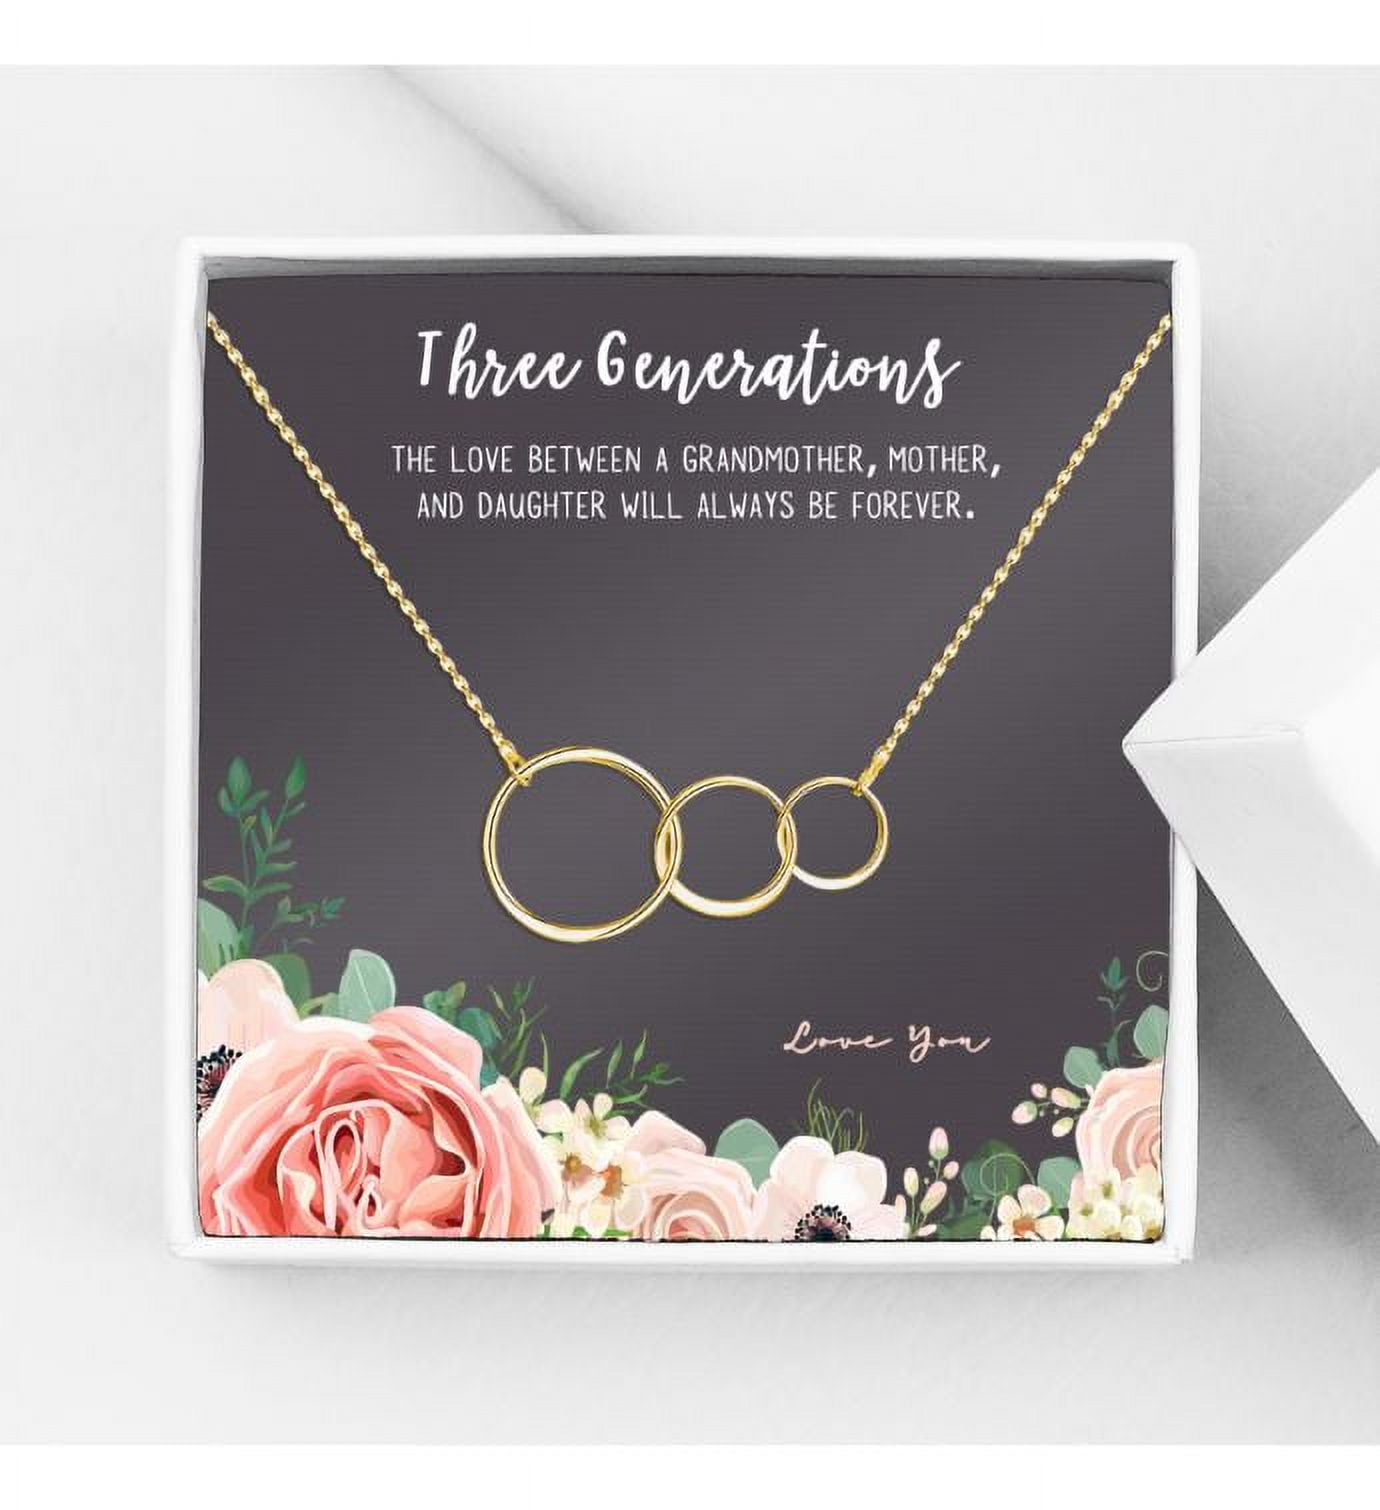 Three Generations Necklace Set Mother Daughter Granddaughter Necklace Gift  for Grandmother Sterling Silver Generations Necklaces Circle Link - Etsy | Generation  necklace, Mother daughter granddaughter, Mother daughter gifts